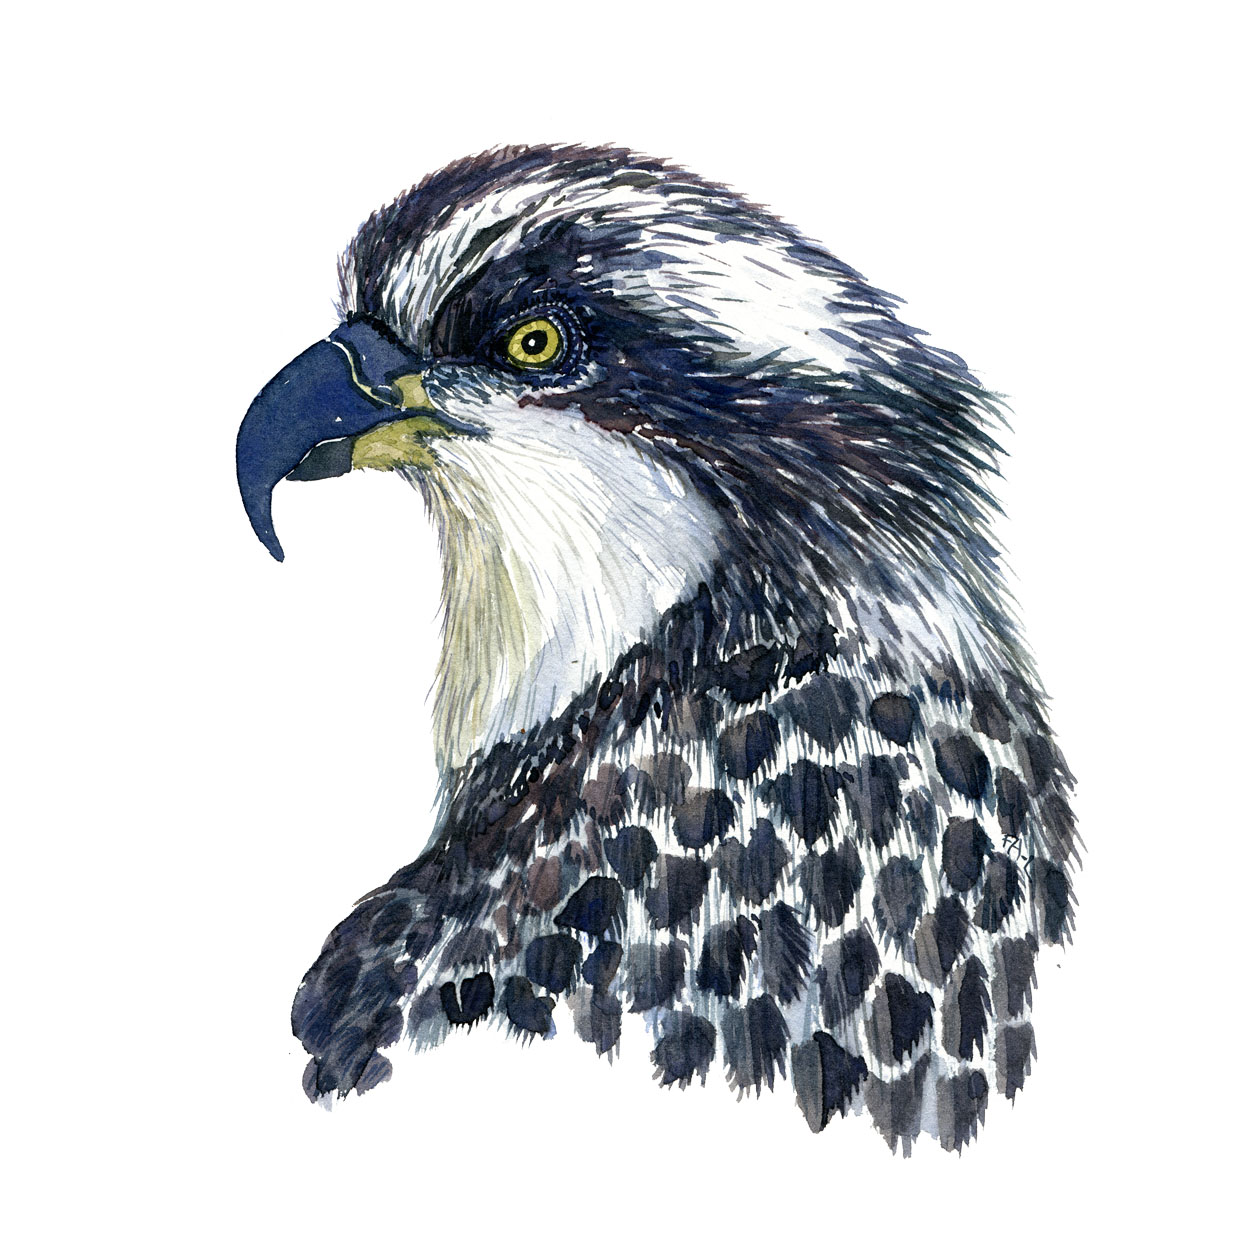 Osprey - a watercolor study sketch. Pure watercolor painting by Frits Ahlefeldt